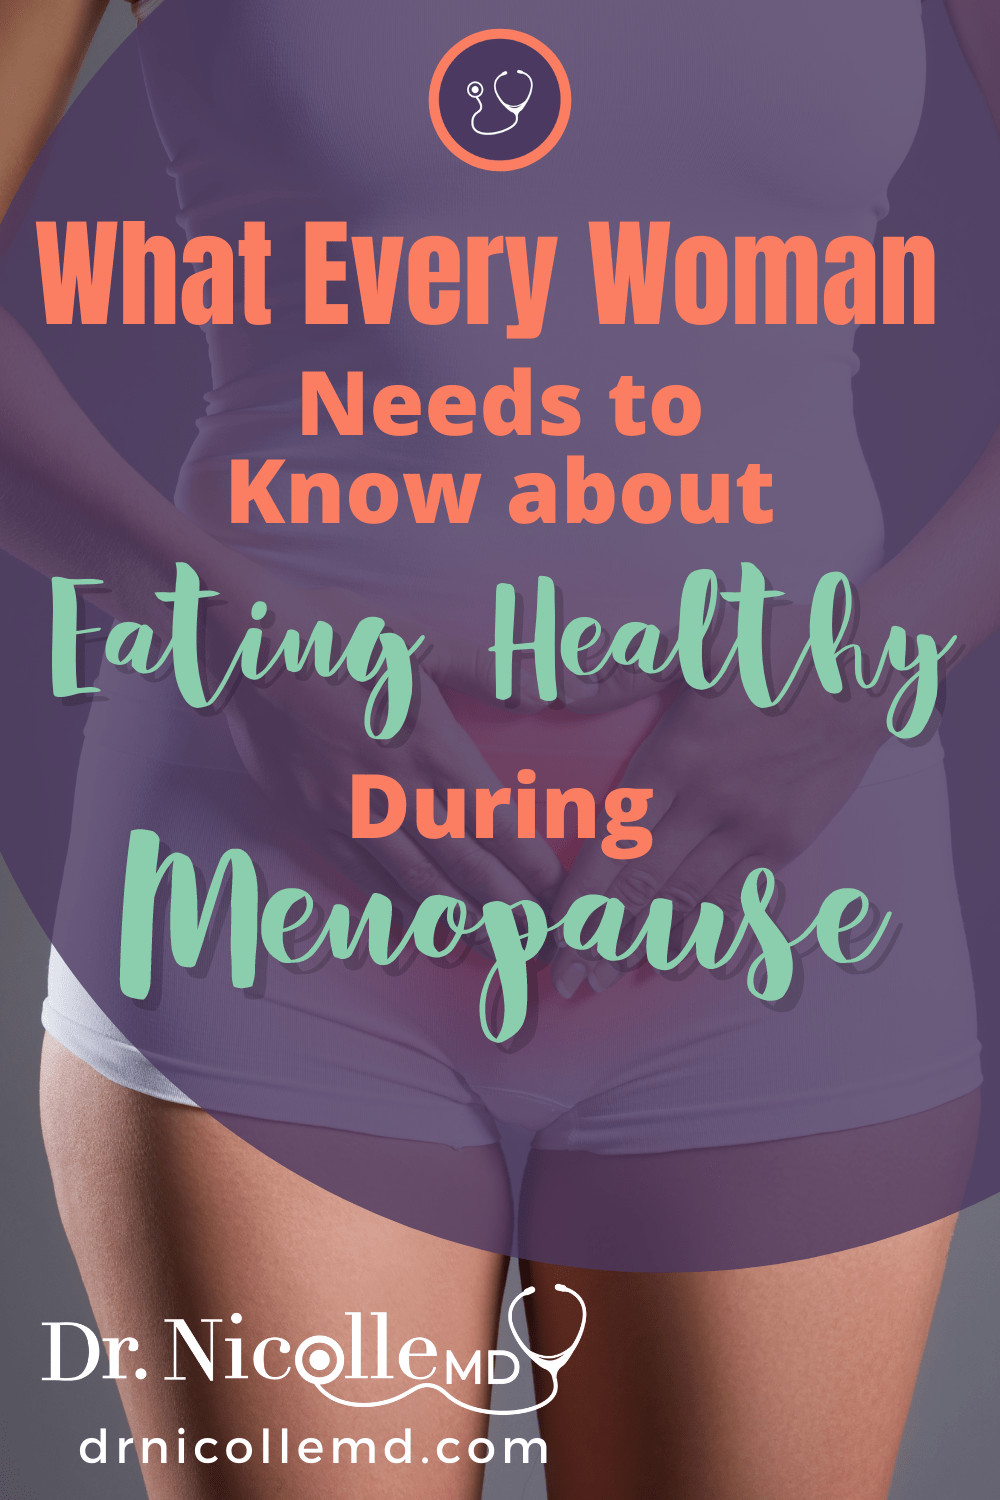 What Every Woman Needs to Know about Eating Healthy During Menopause